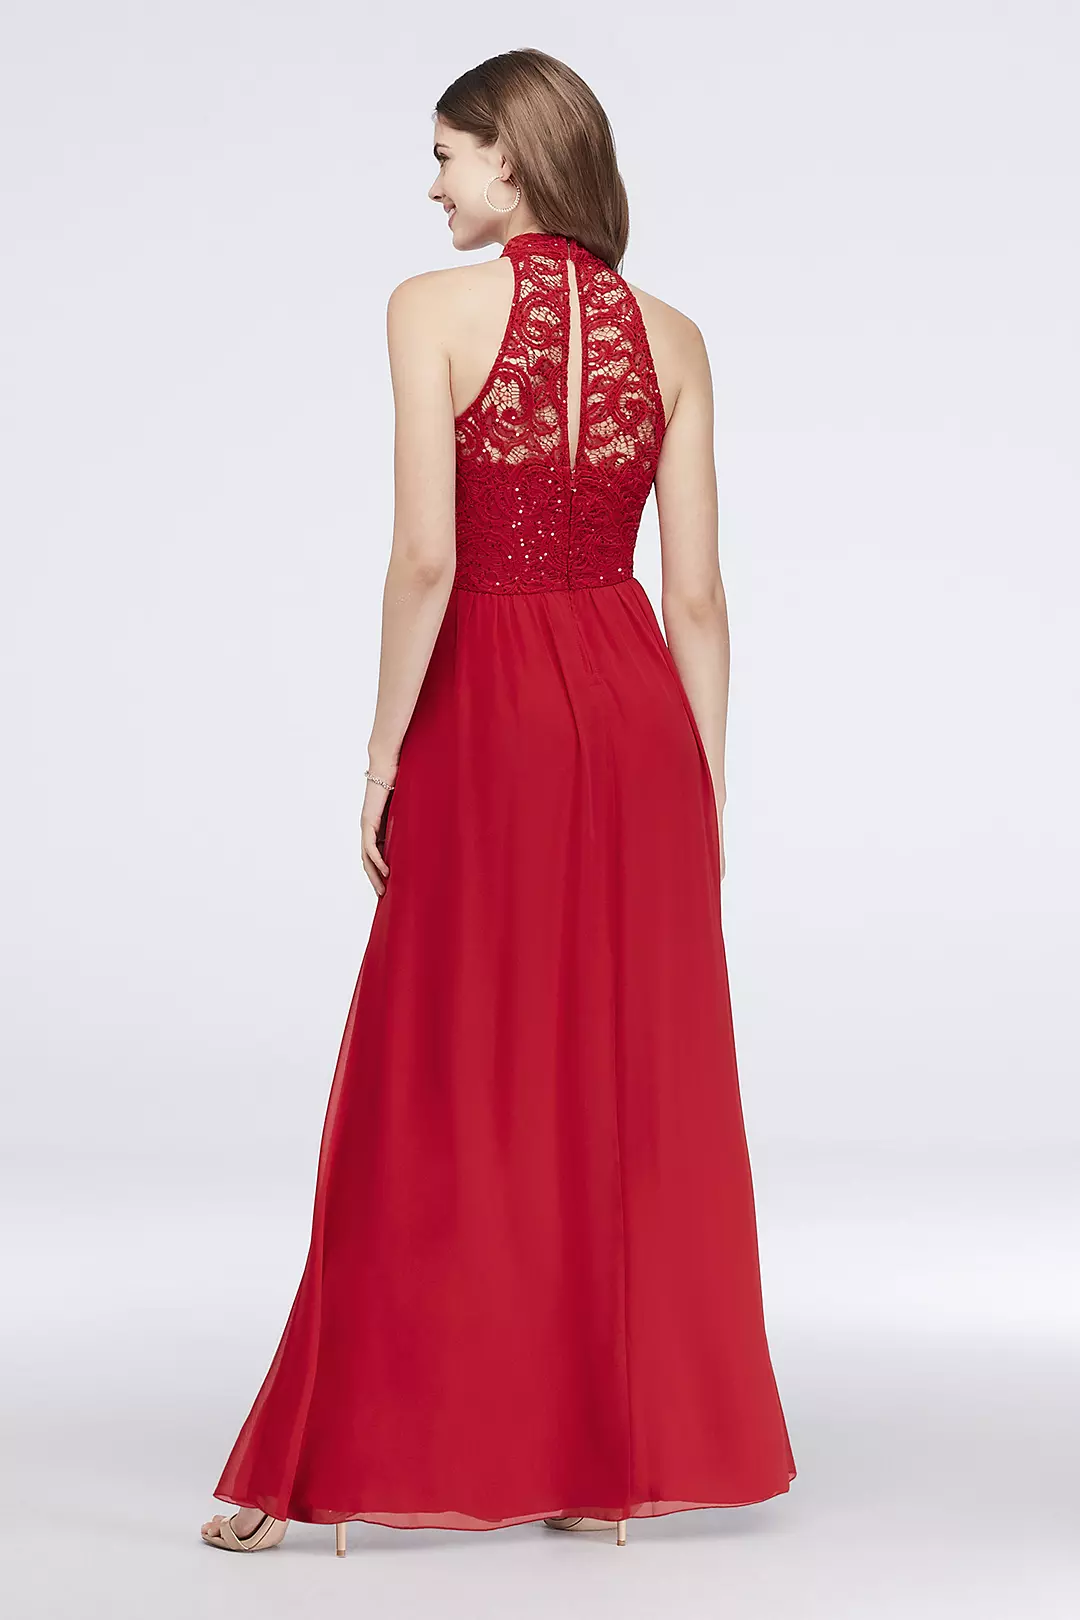 Illusion High-Neck Lace and Chiffon A-Line Gown Image 2